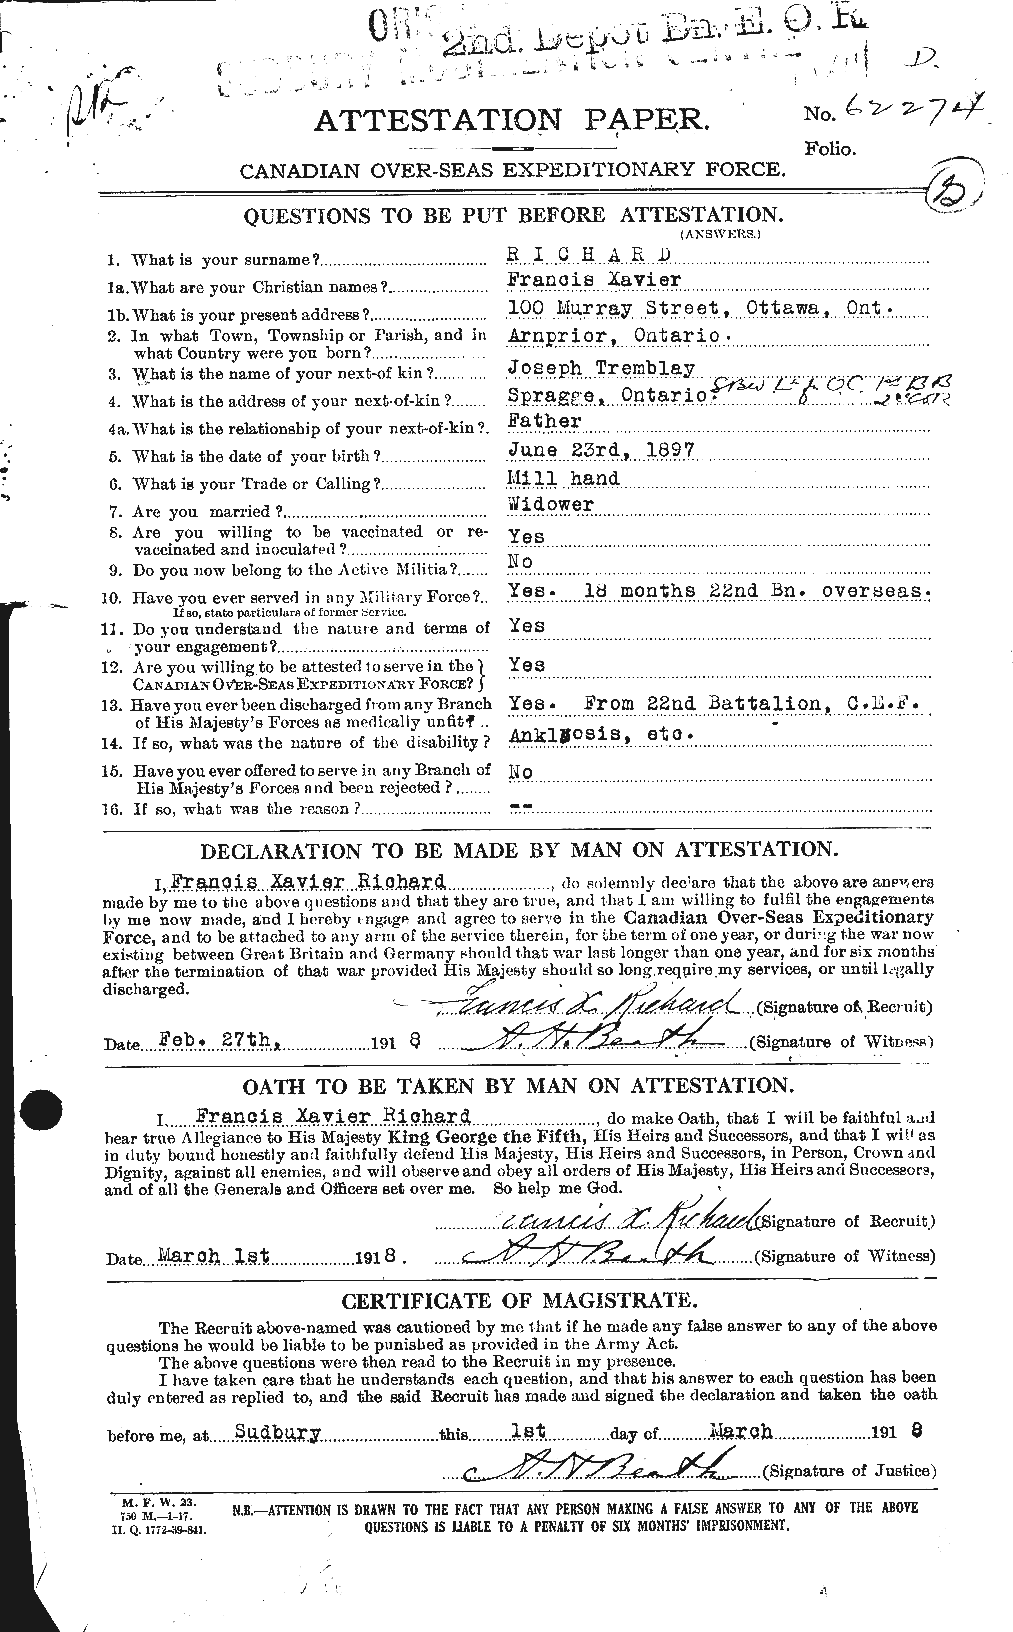 Personnel Records of the First World War - CEF 639044a